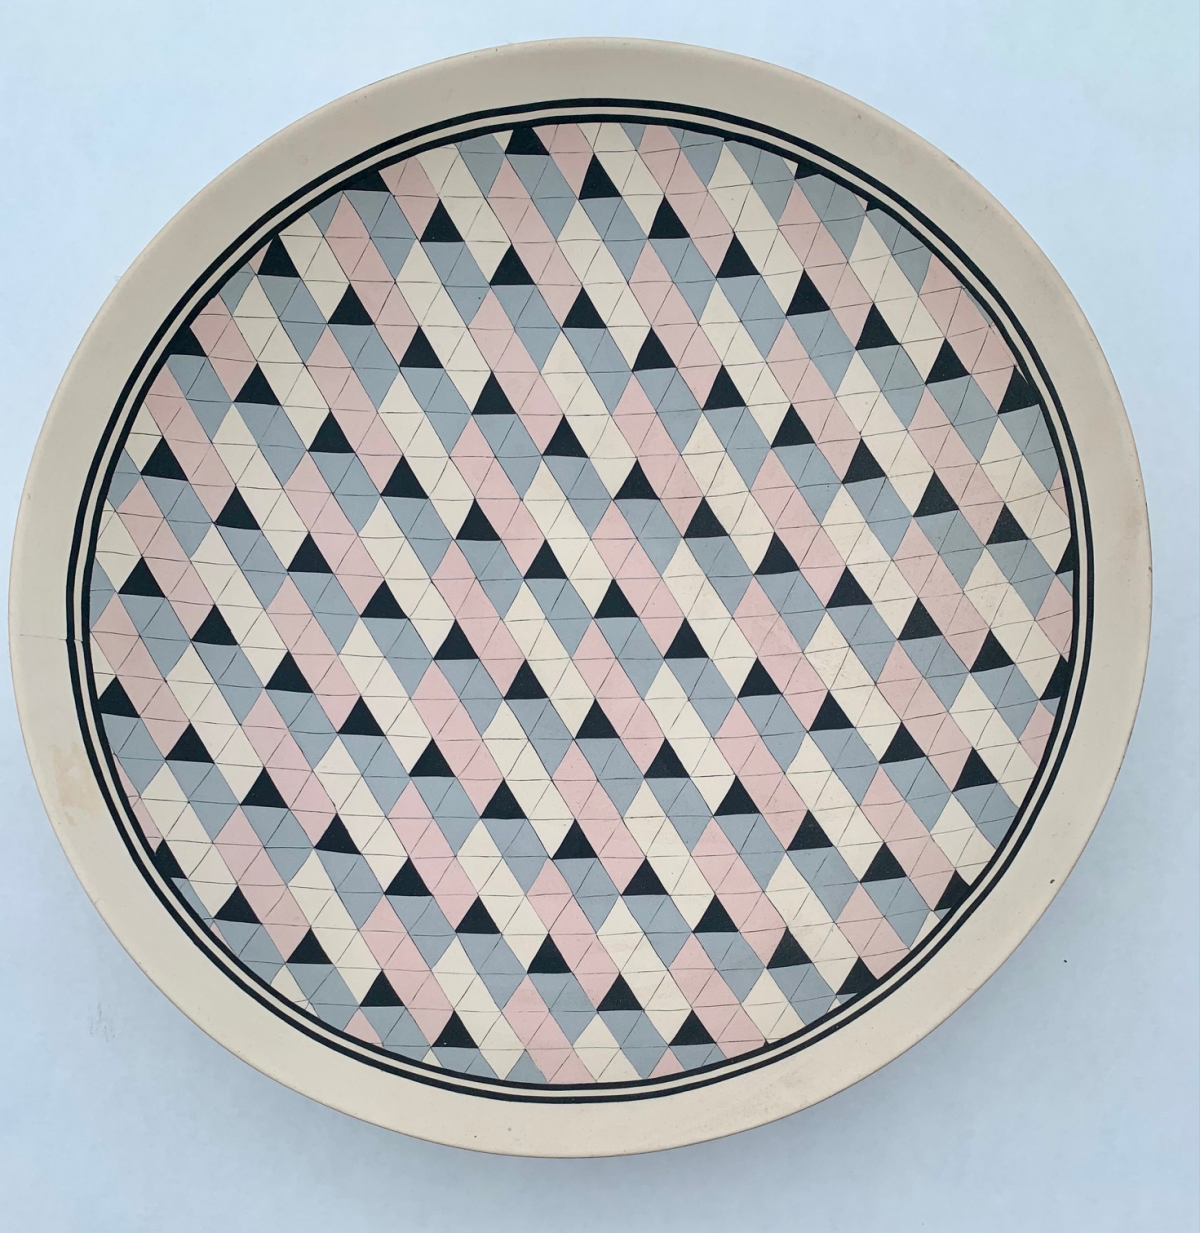 Ceramic plate with quilting pattern